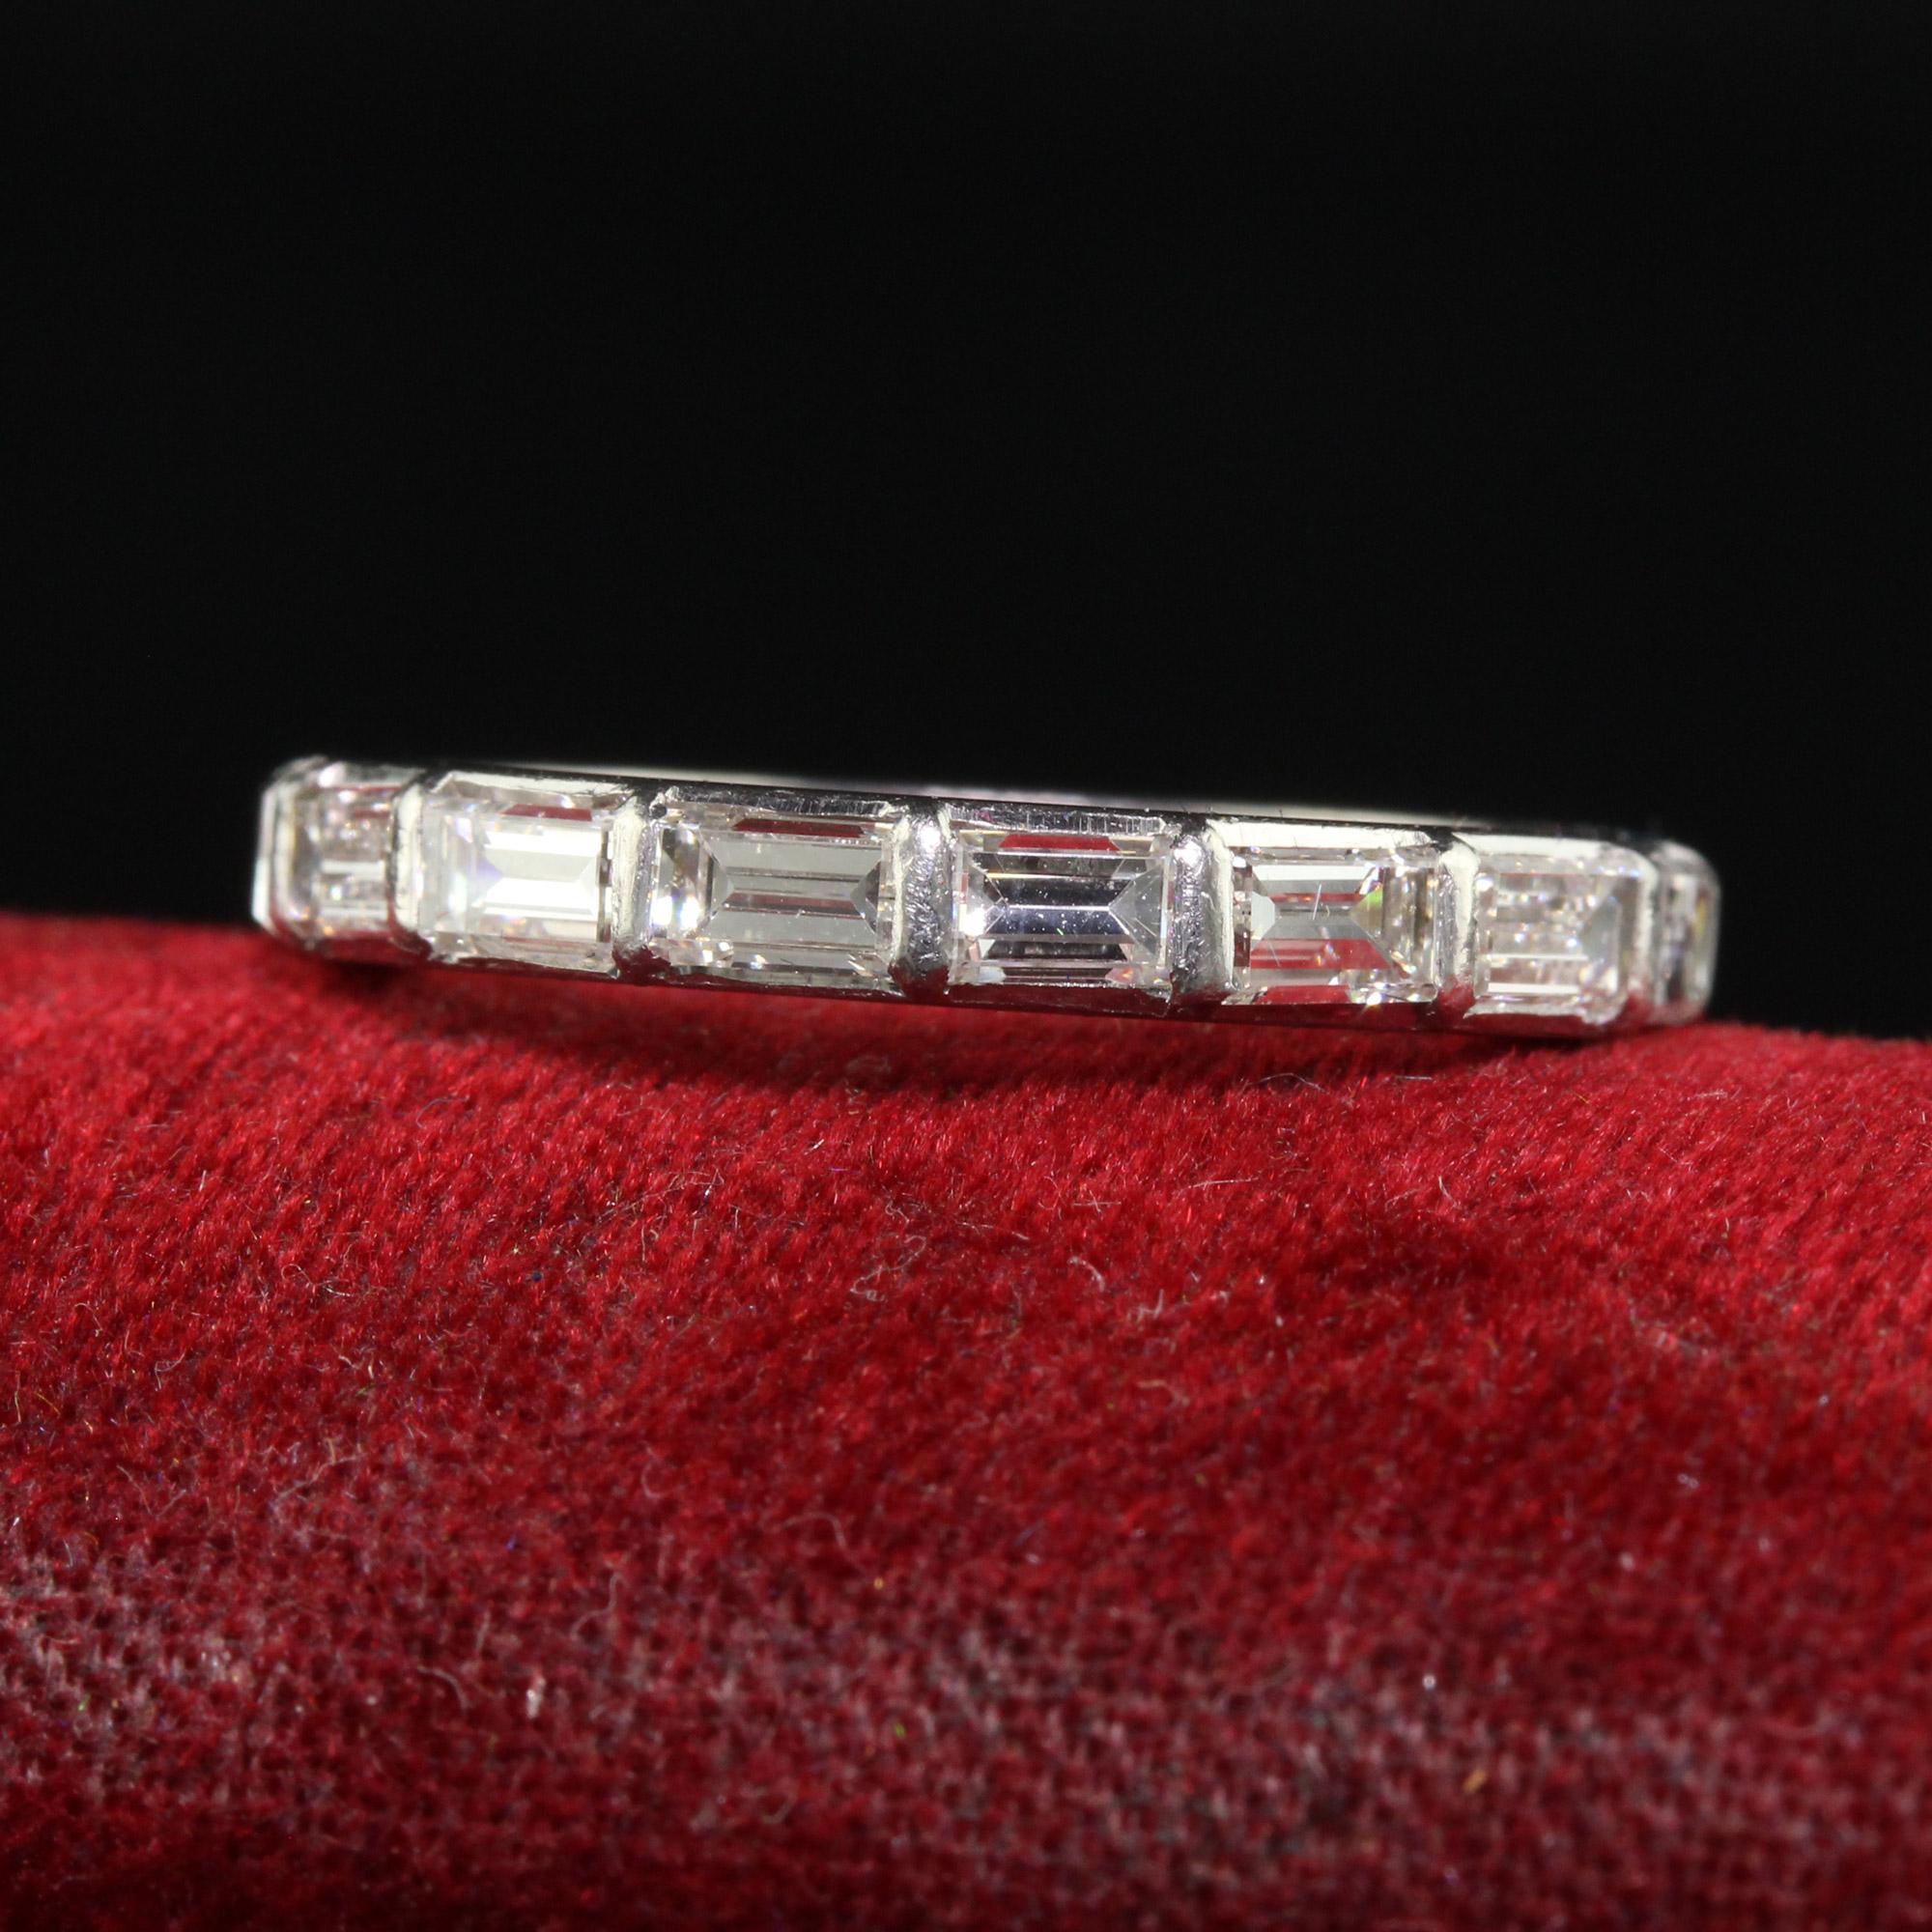 Beautiful Retro Platinum Baguette Diamond East West Eternity Band. This gorgeous vintage eternity band is crafted in platinum. There are beautiful white baguettes set in the east/west orientation around the entire band. The diamonds are all in good